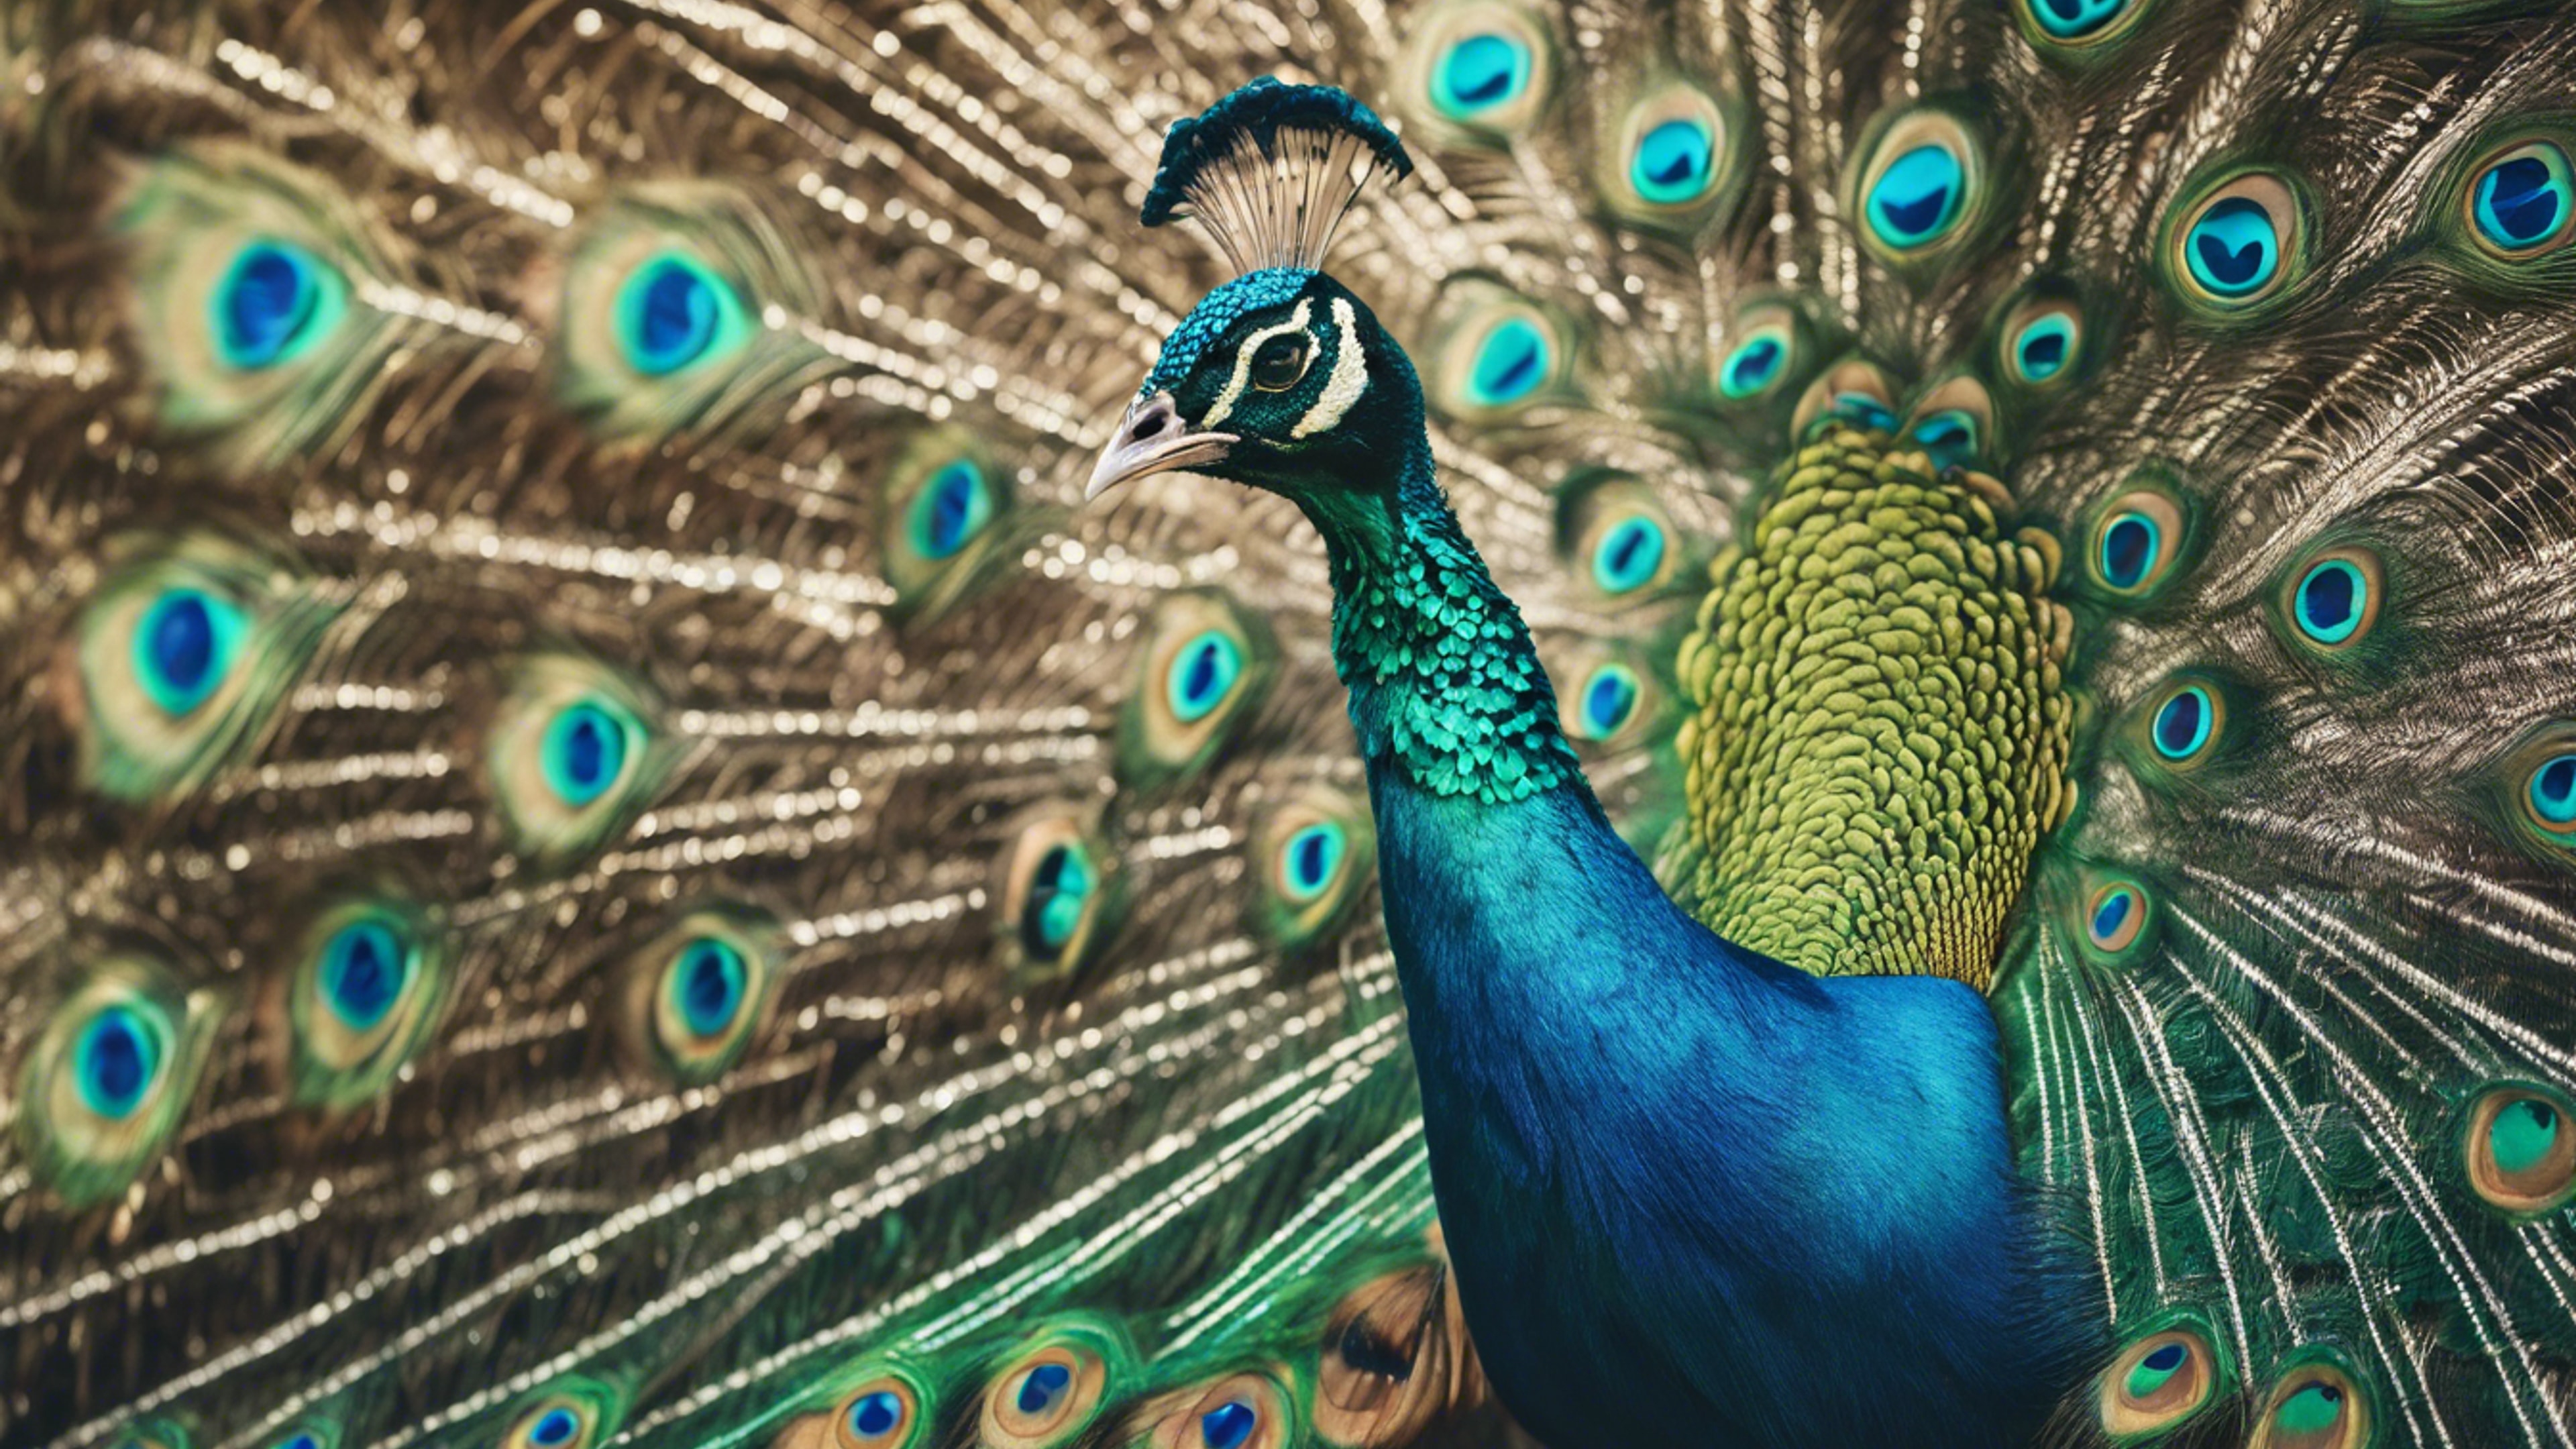 A proudly standing peacock showing off its cool teal plumage.壁紙[c03cd8acf17648f0a47e]